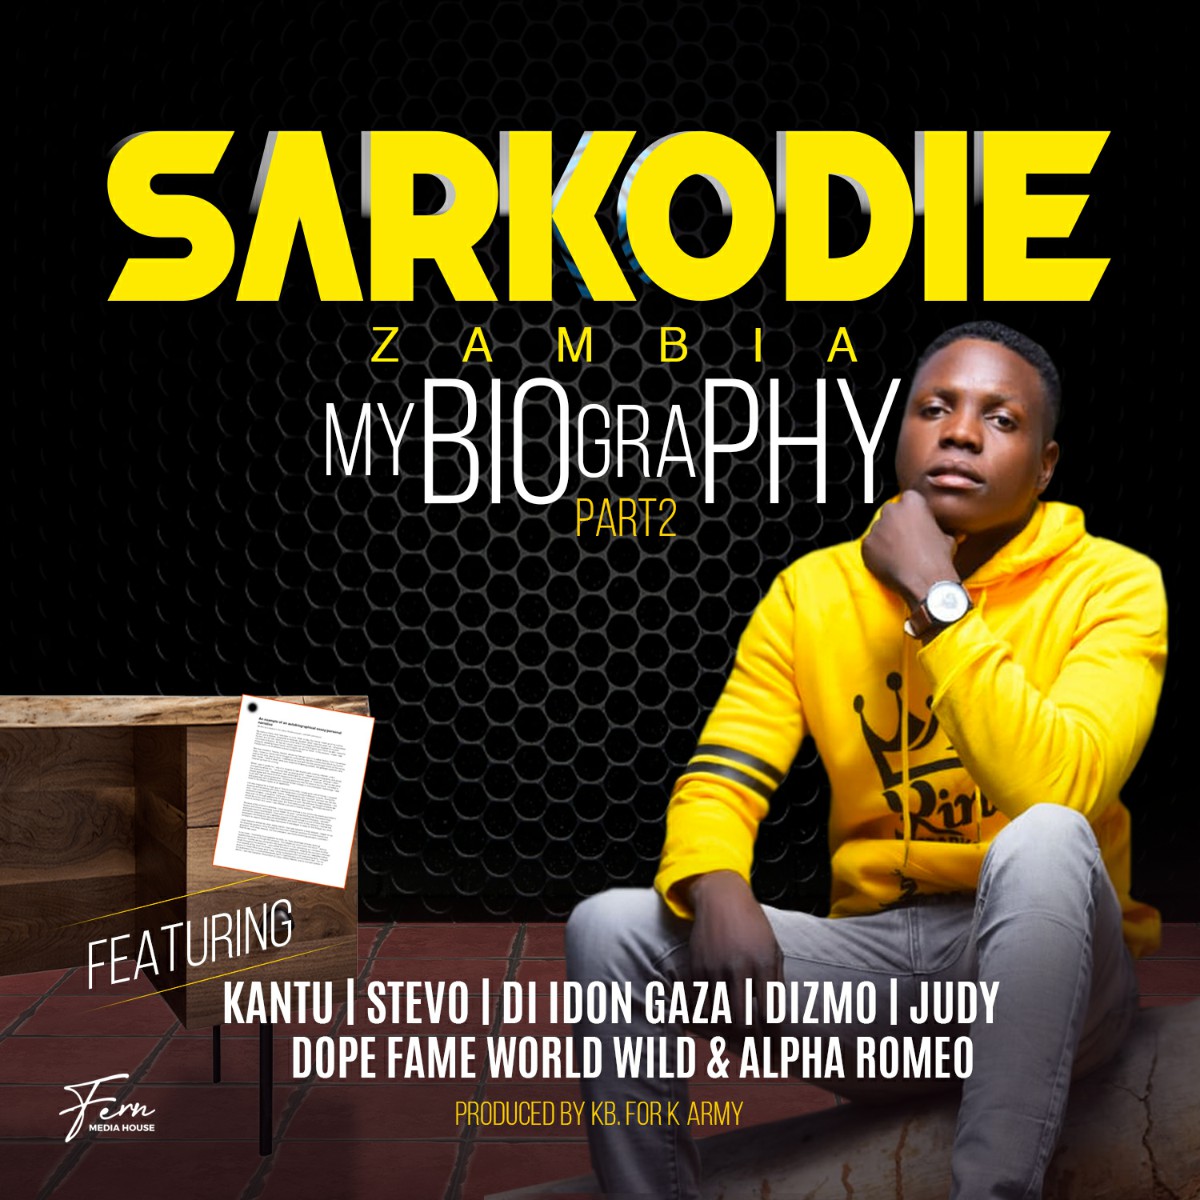 Sarkodie Zambia ft. Various Artists - My Biography - Part 2 (Prod. KB)